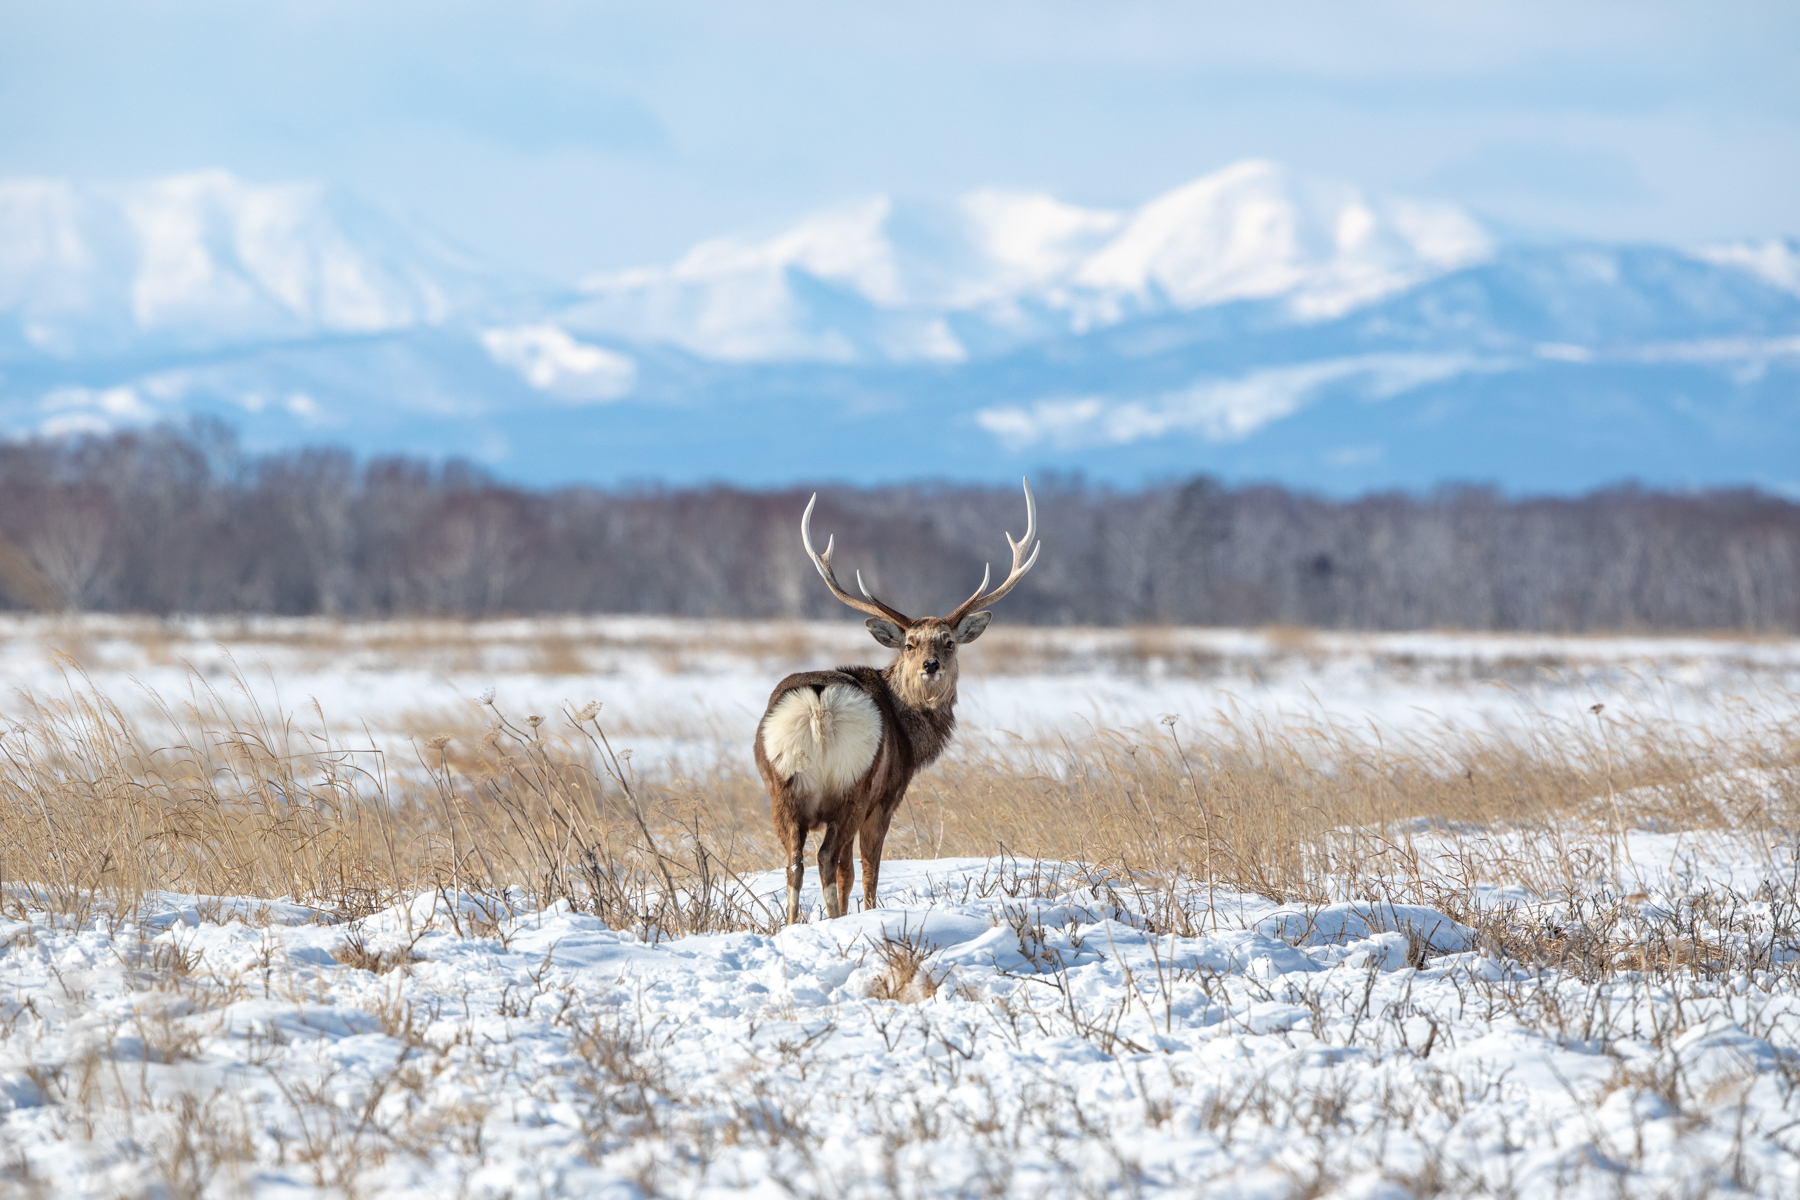 A male Sika Deer amidst Hokkaido's spectacular landscape (image by Mark Beaman)